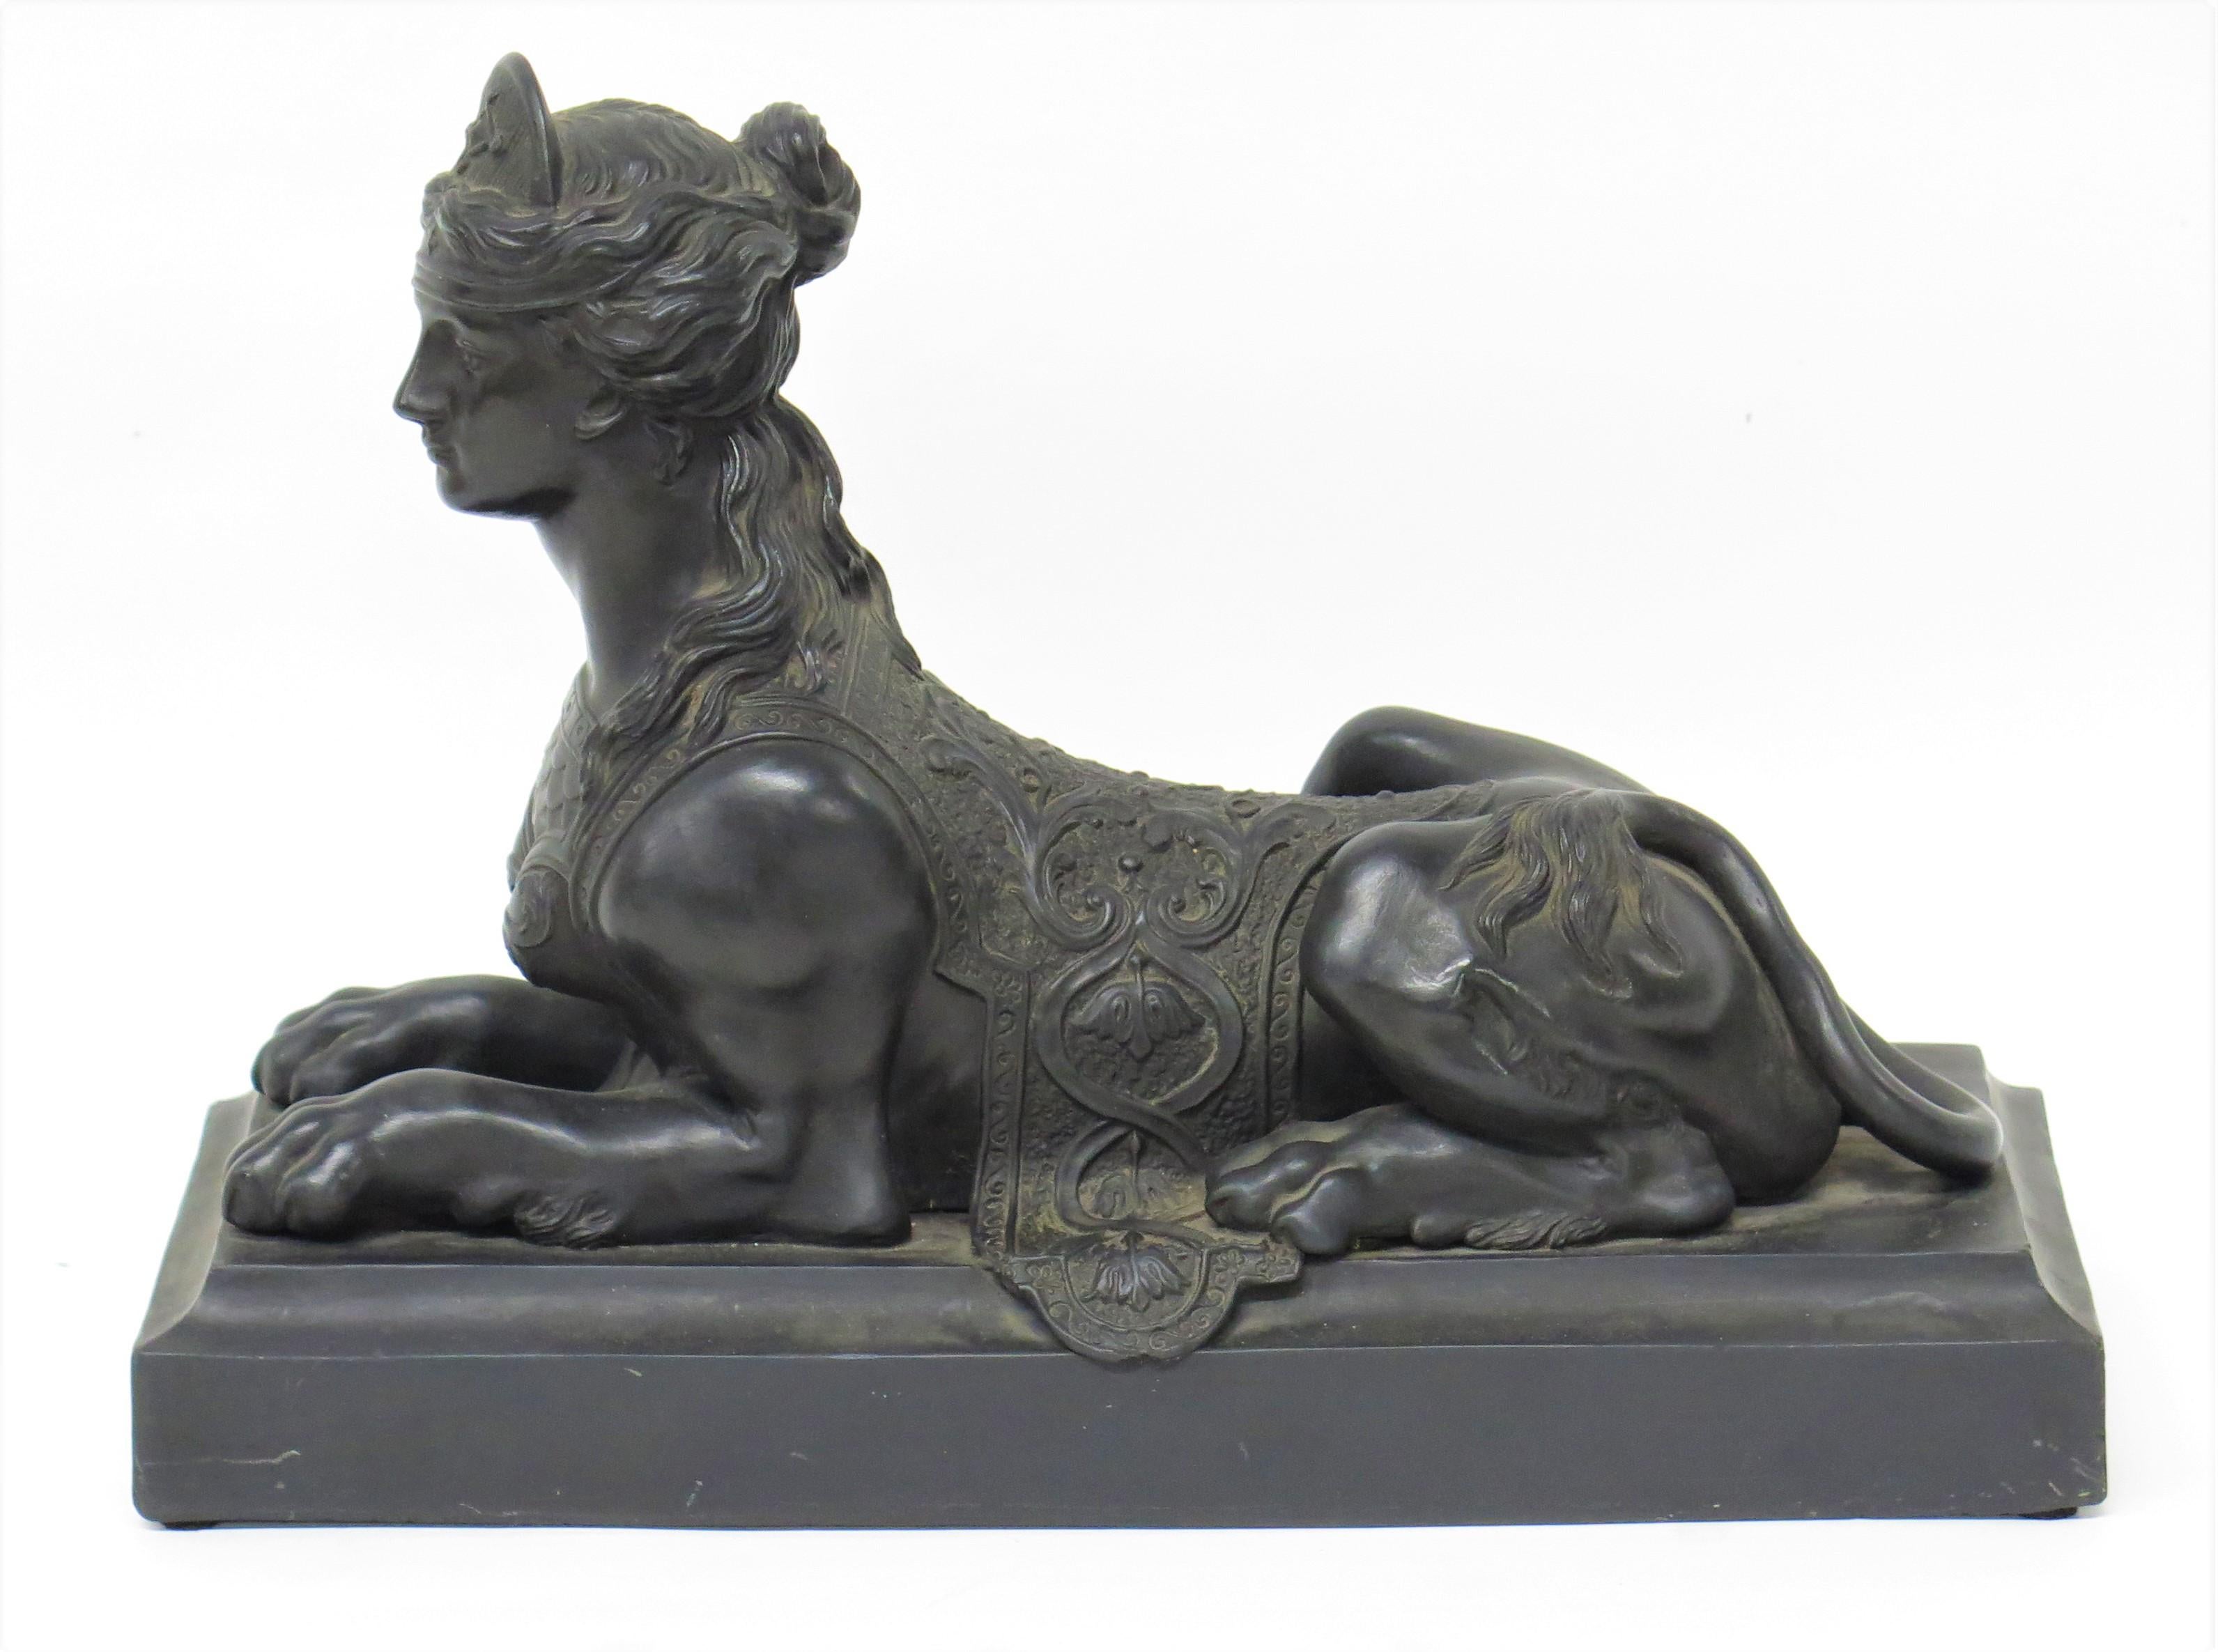 a Wedgwood black basalt Grecian Sphinx after a model by sculptor John Cheere (English, 1709-1787), in the Greco-Egyptian style, depicted as a female figure with a lion's body, wearing a diadem, scaled breast plate and an elaborately patterned